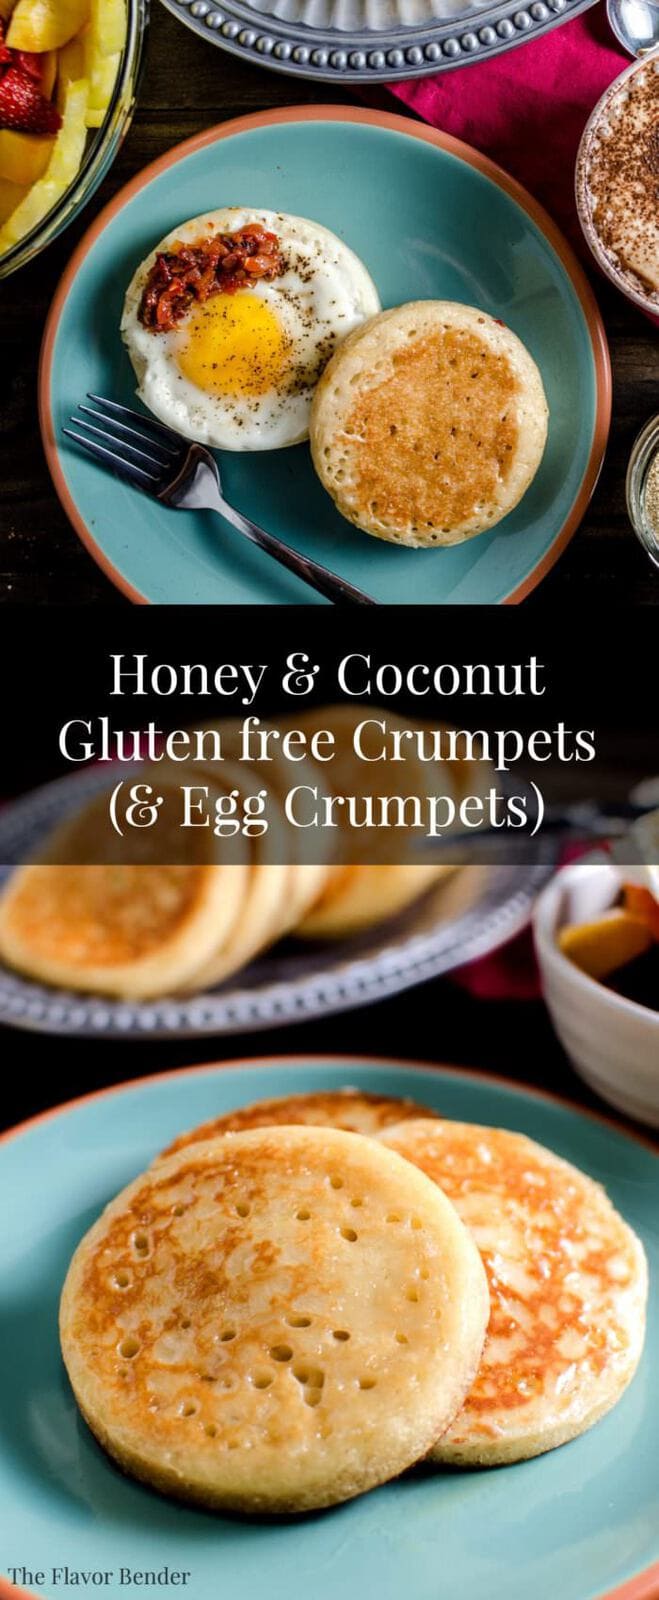 Crumpets with Honey and Coconut - These are the BEST gluten free or ANY kind of crumpet you'll ever eat! Reminiscent of a Sri Lankan Hopper, but far easier to make. Even better with an Egg cooked IN IT! #DominoSugarGranules - CLICK TO GET THE RECIPE or RE PIN TO SAVE!